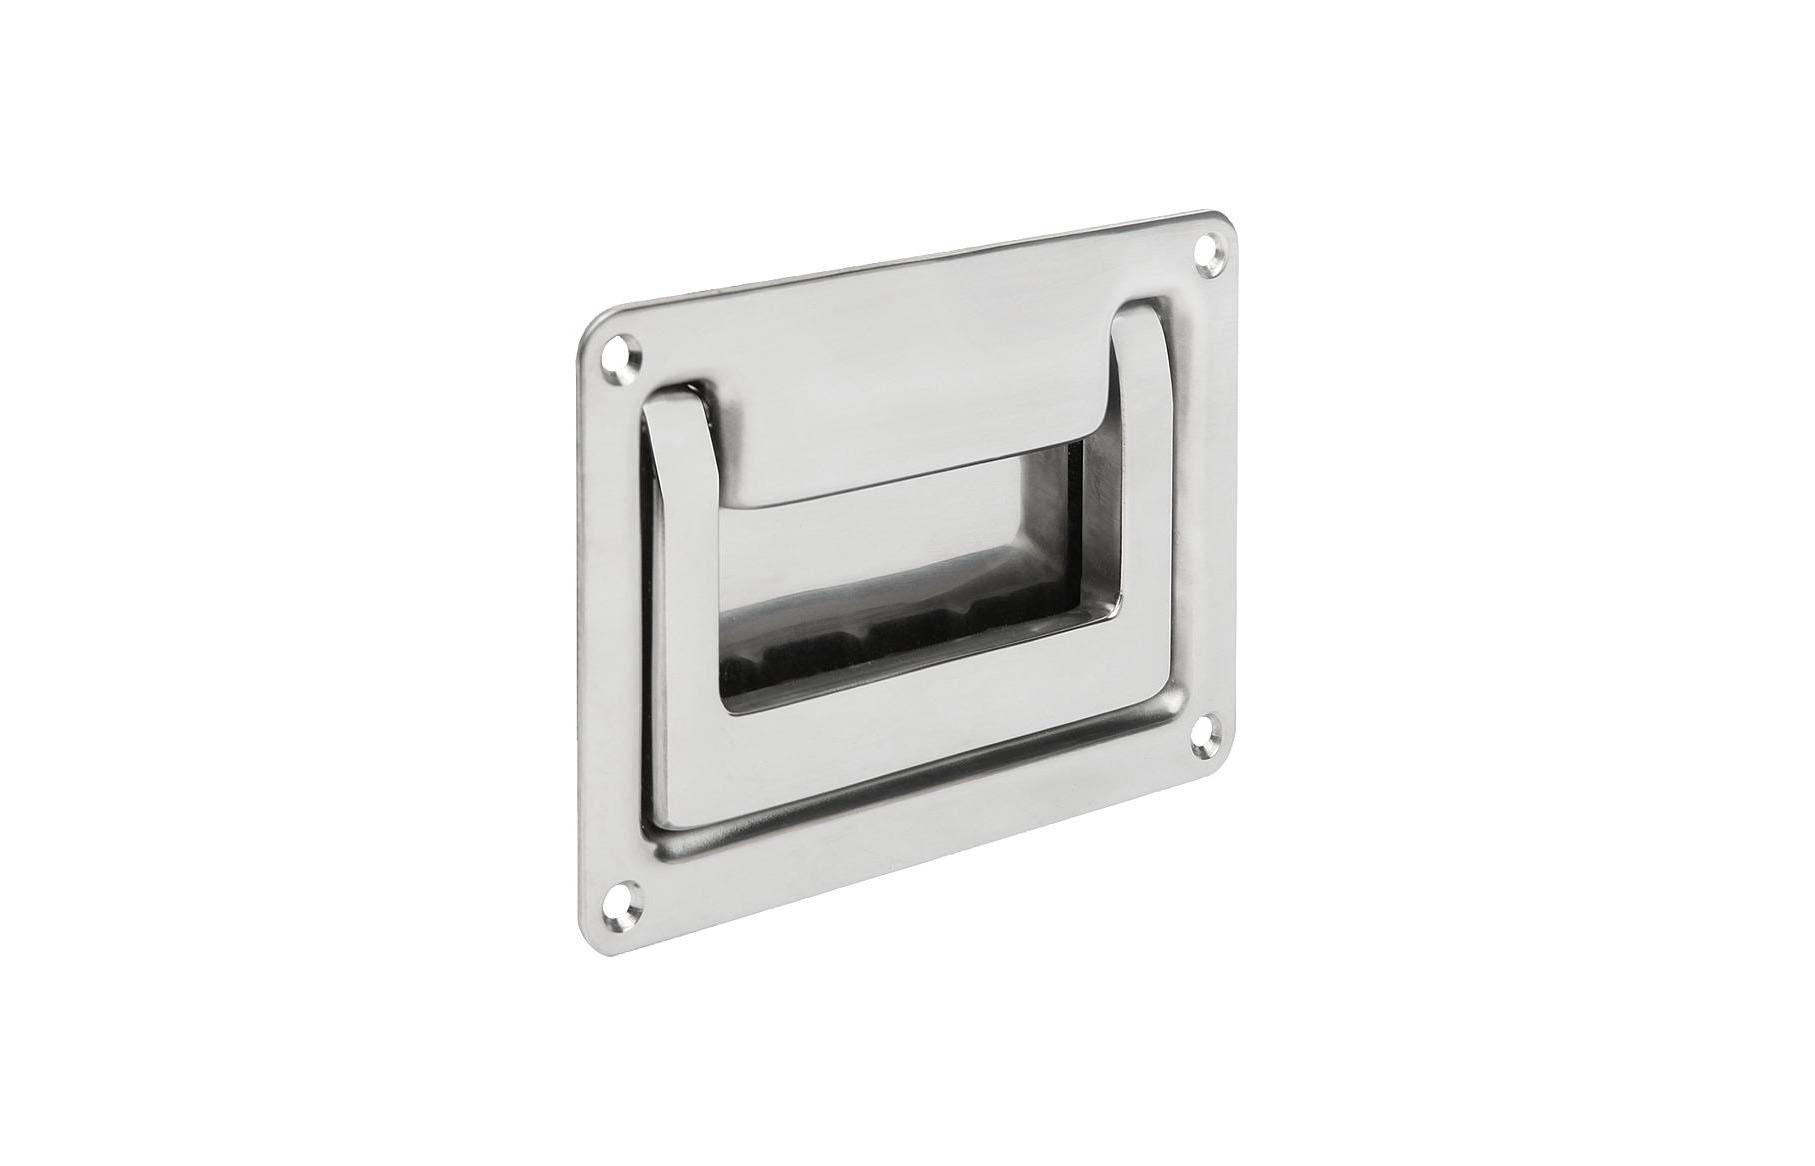 K1305_Recessed handles fold-down stainless steel